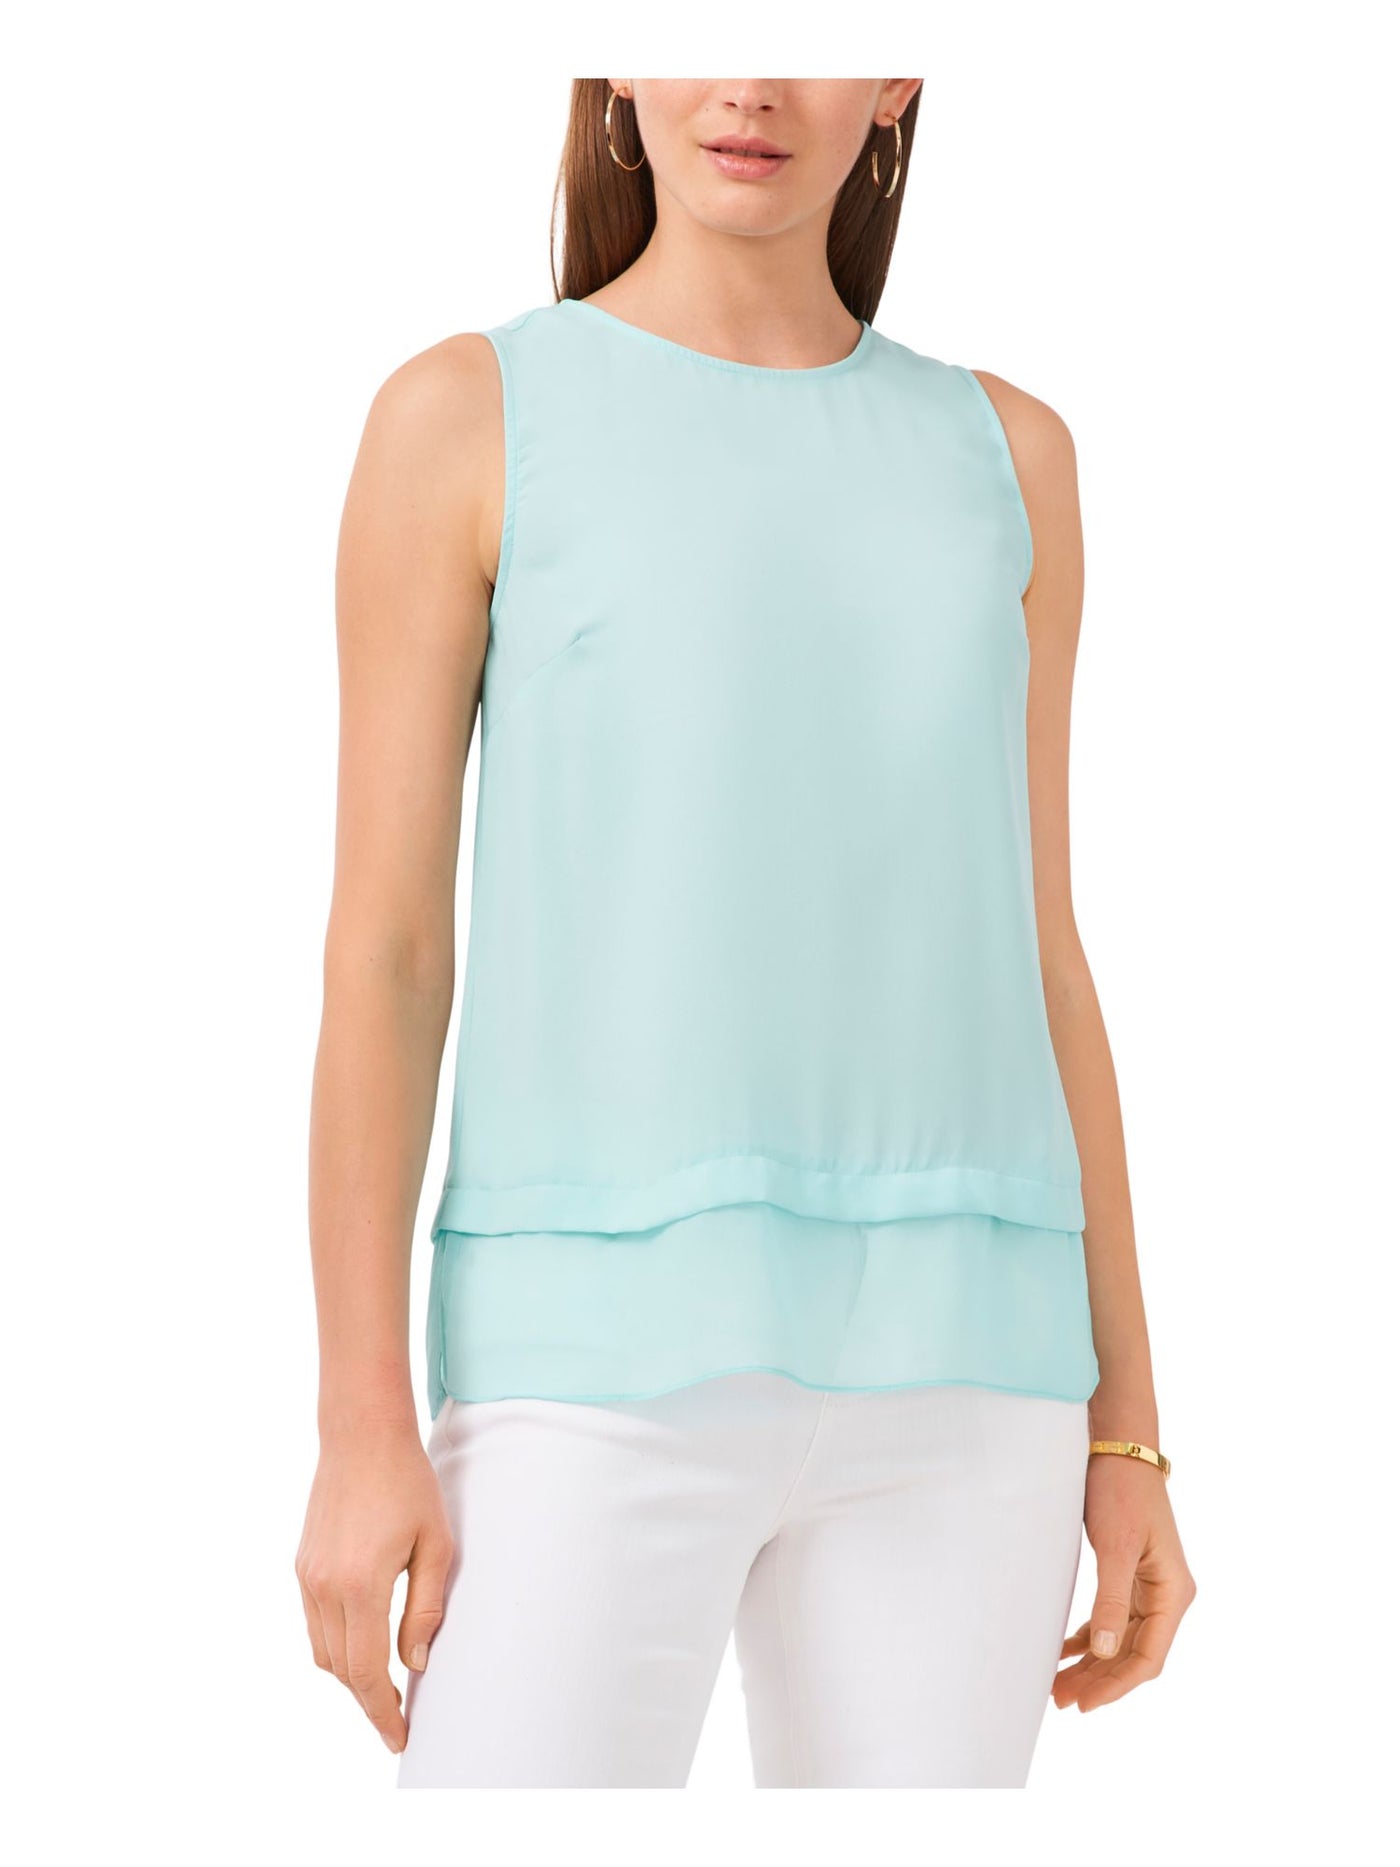 VINCE CAMUTO Womens Turquoise Sheer Sleeveless Crew Neck Top XS